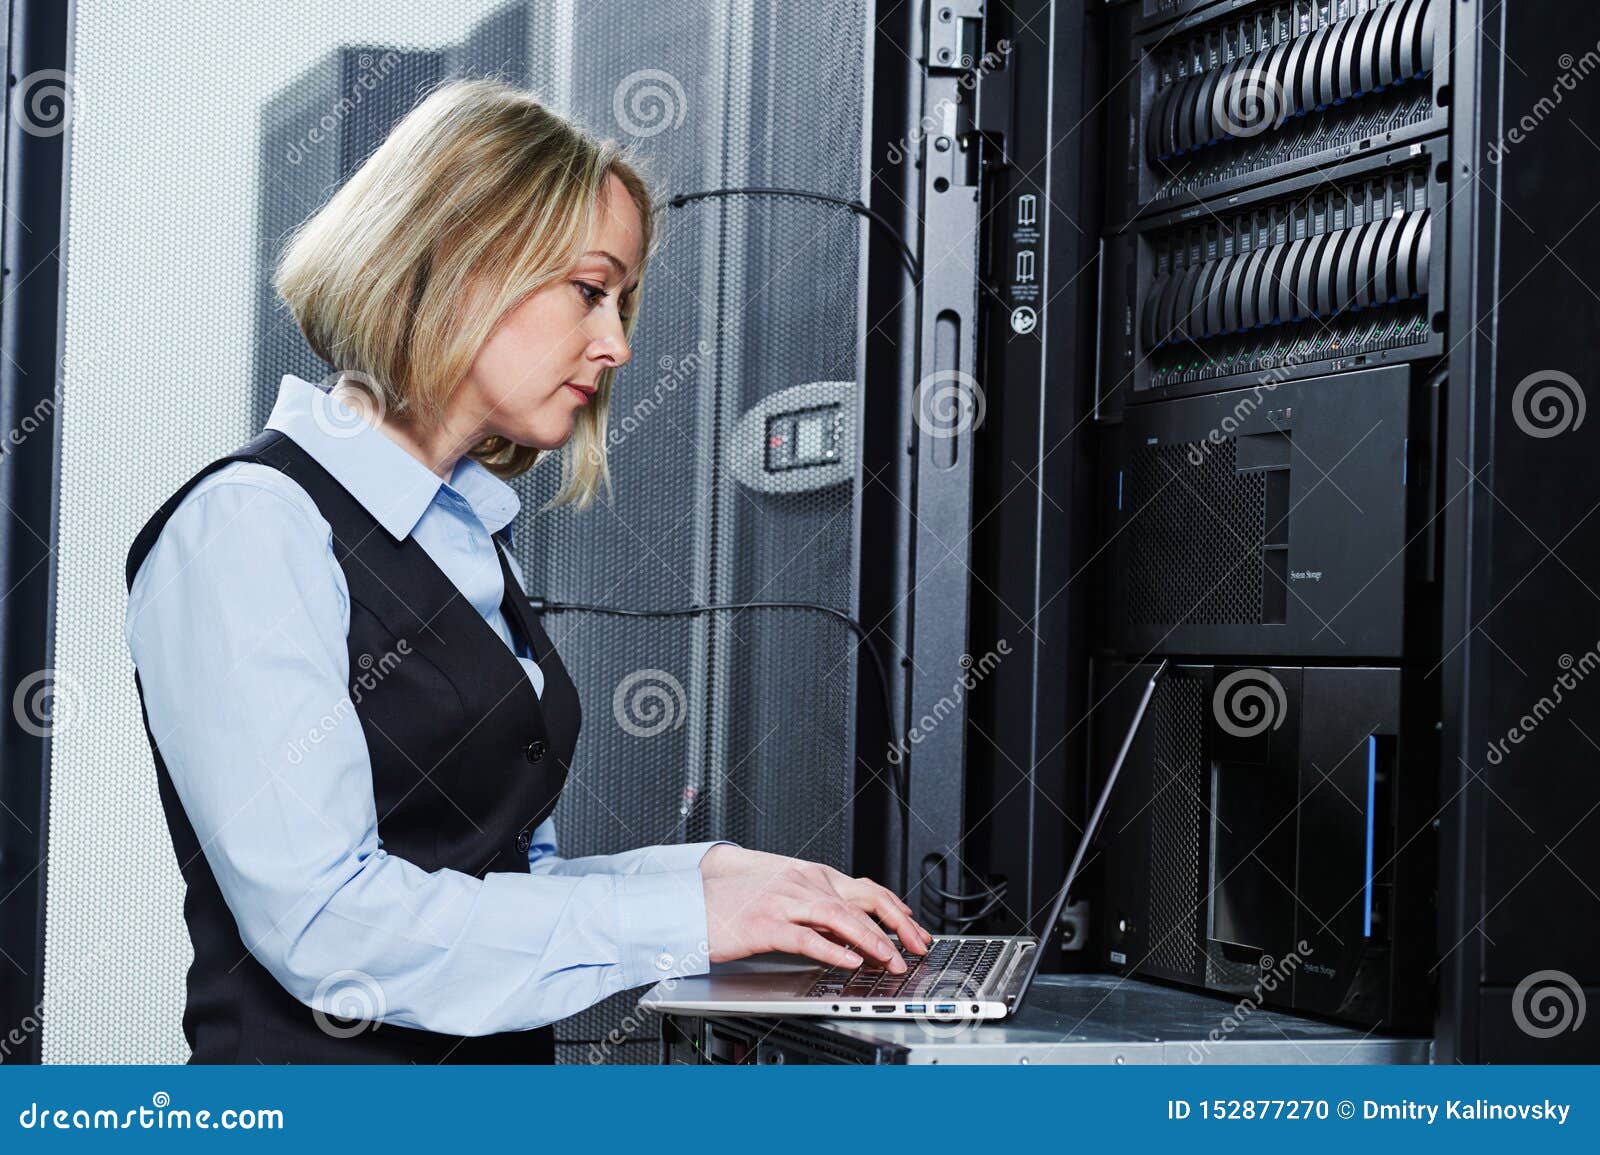 cloud storage service. female engineer works with laptop in data center